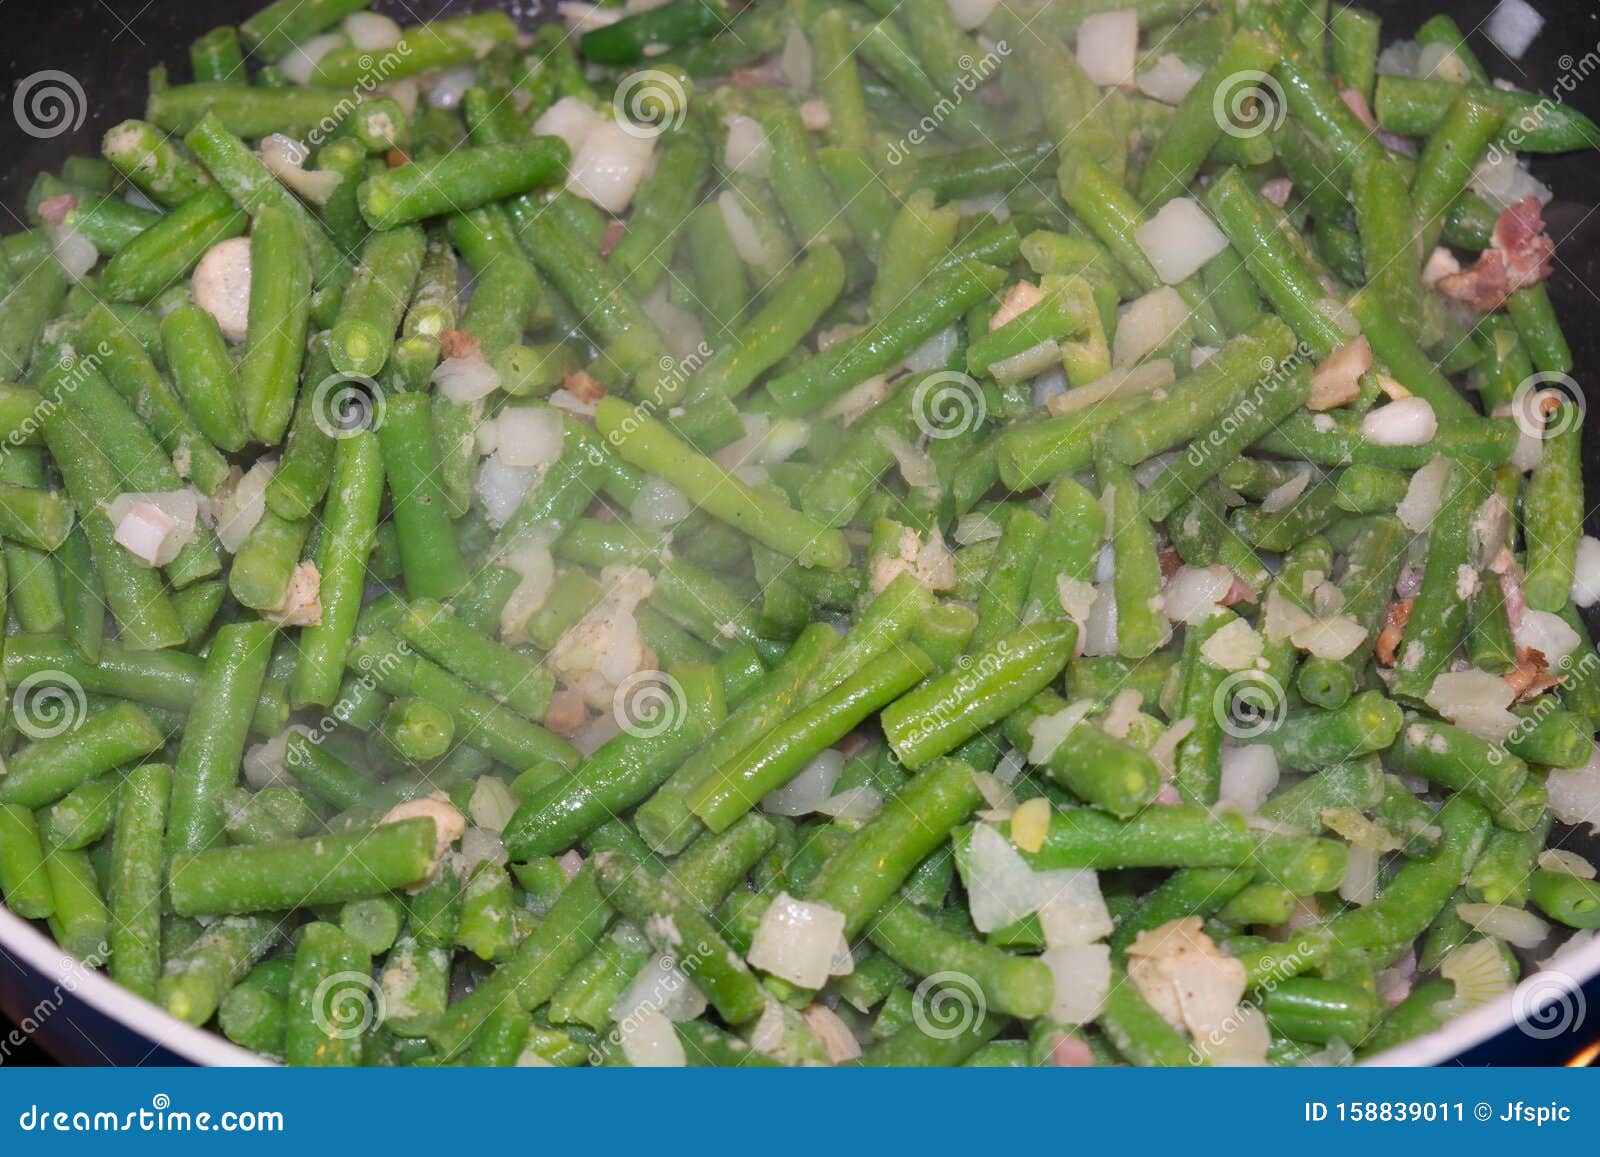 Steamed Young Green Beans Stock Image Image Of Carrot 158839011,Chocolate Muffin Recipe Uk